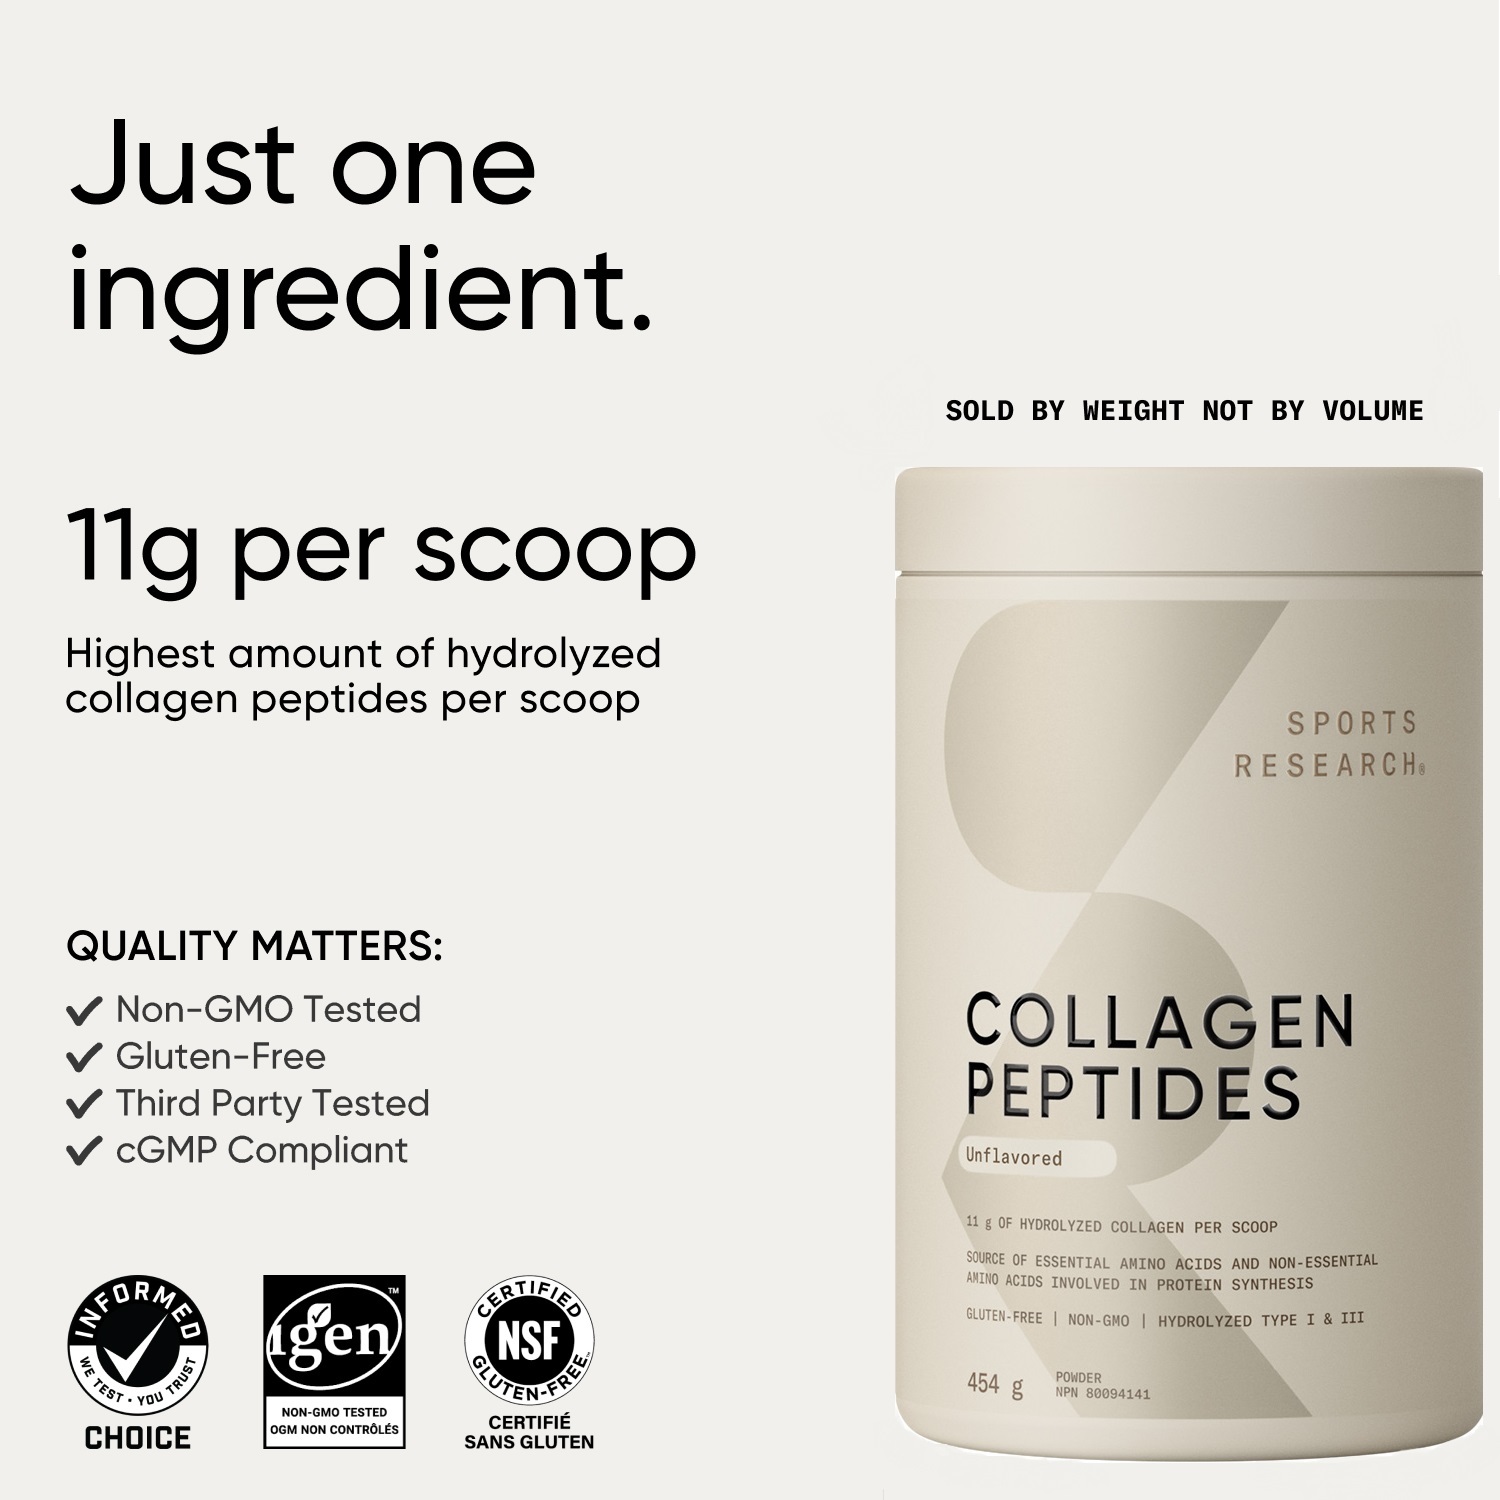 Sports Research Collagen Peptides, Unflavored, 16 oz (454 g) - image 5 of 8